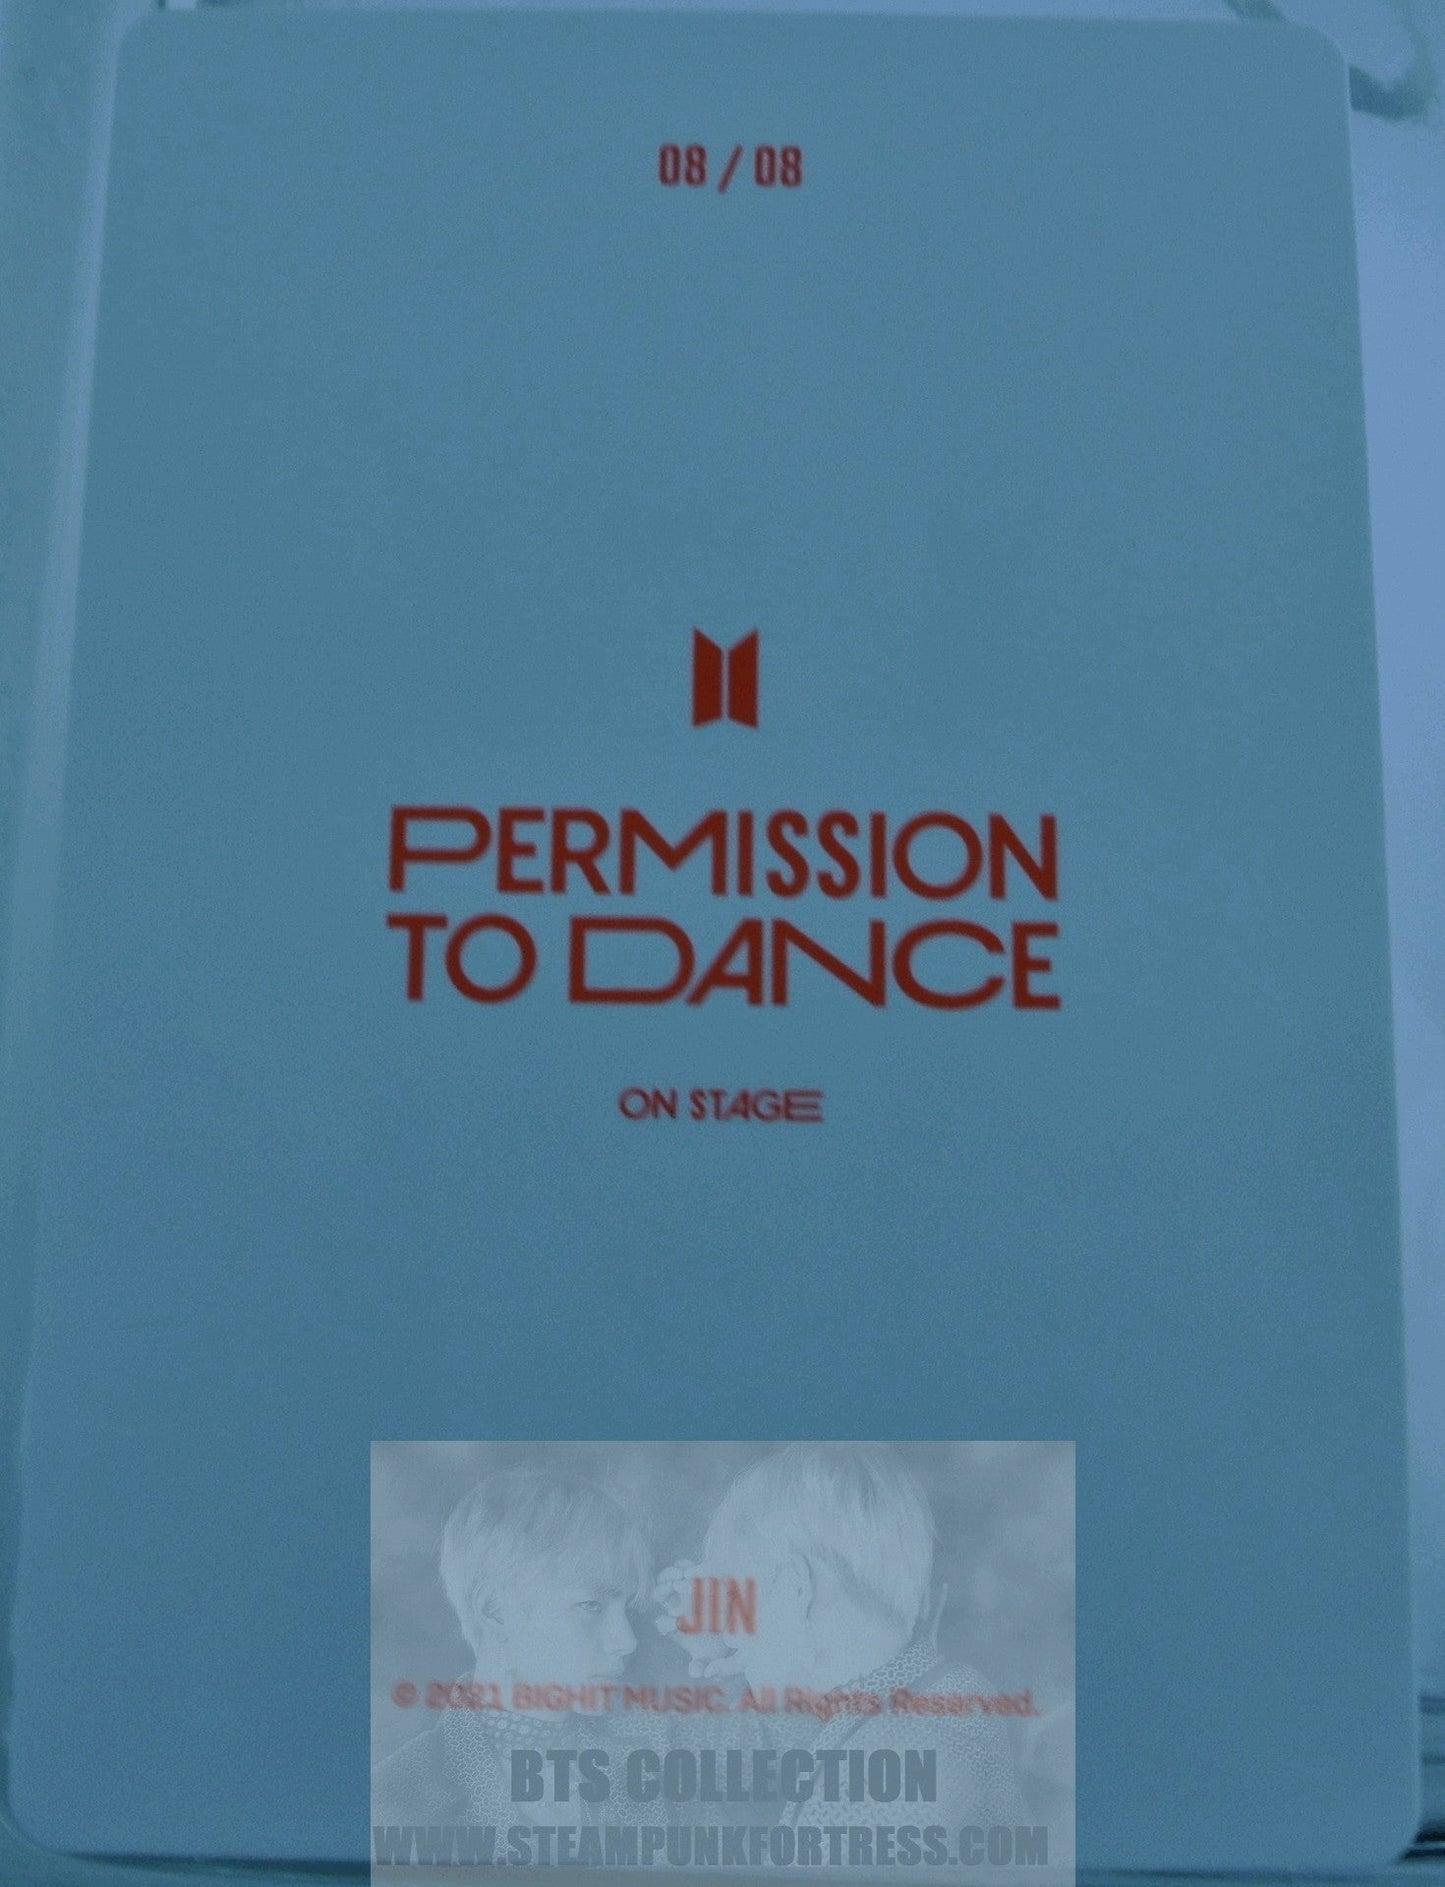 BTS JIN KIM SEOKJIN SEOK-JIN PTD 2021 PERMISSION TO DANCE ON STAGE #8 OF 8 PHOTOCARD PHOTO CARD NEW OFFICIAL MERCHANDISE